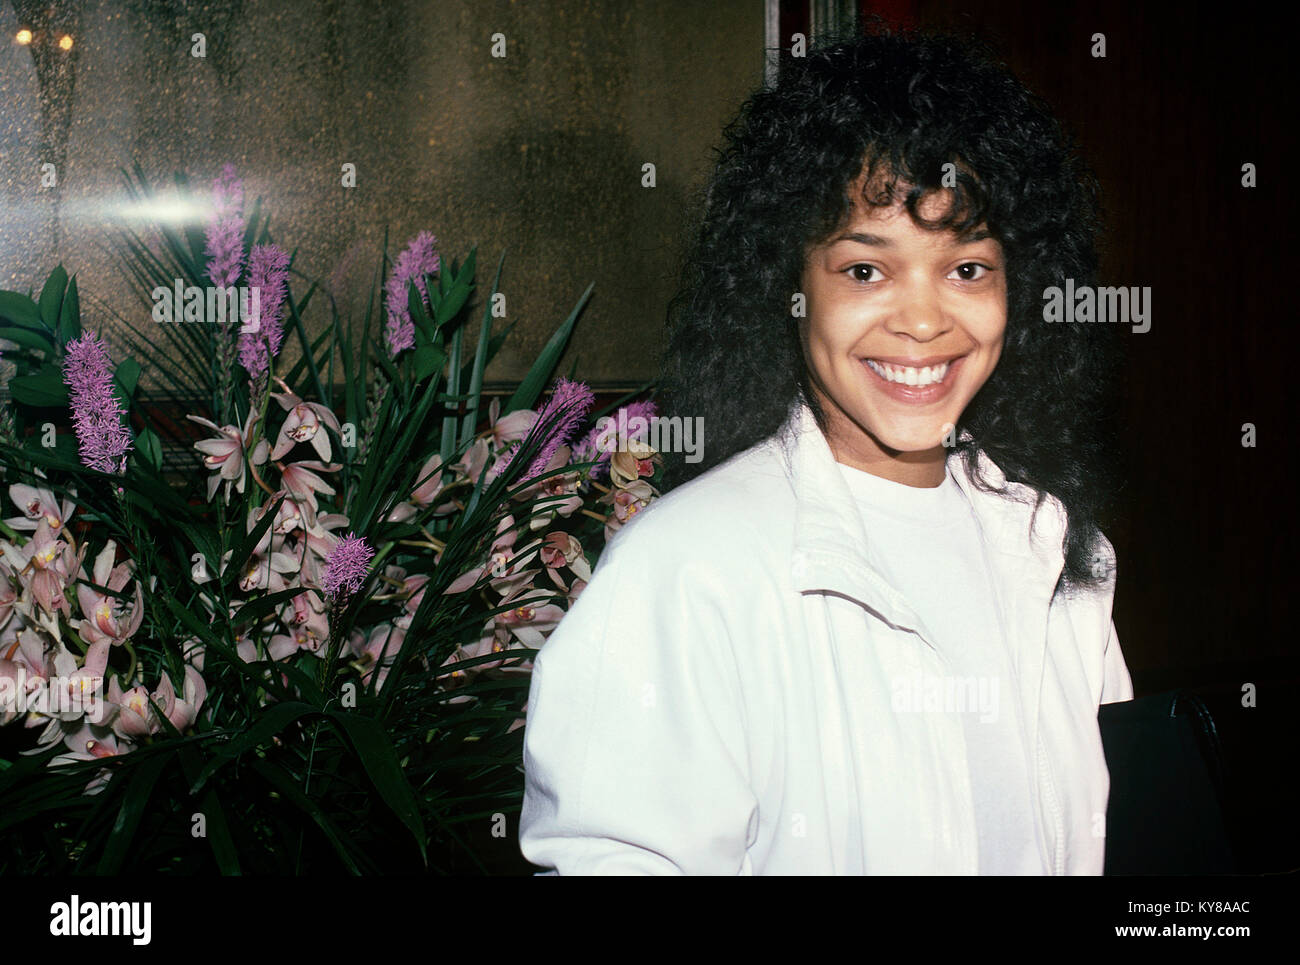 Ola ray pictures